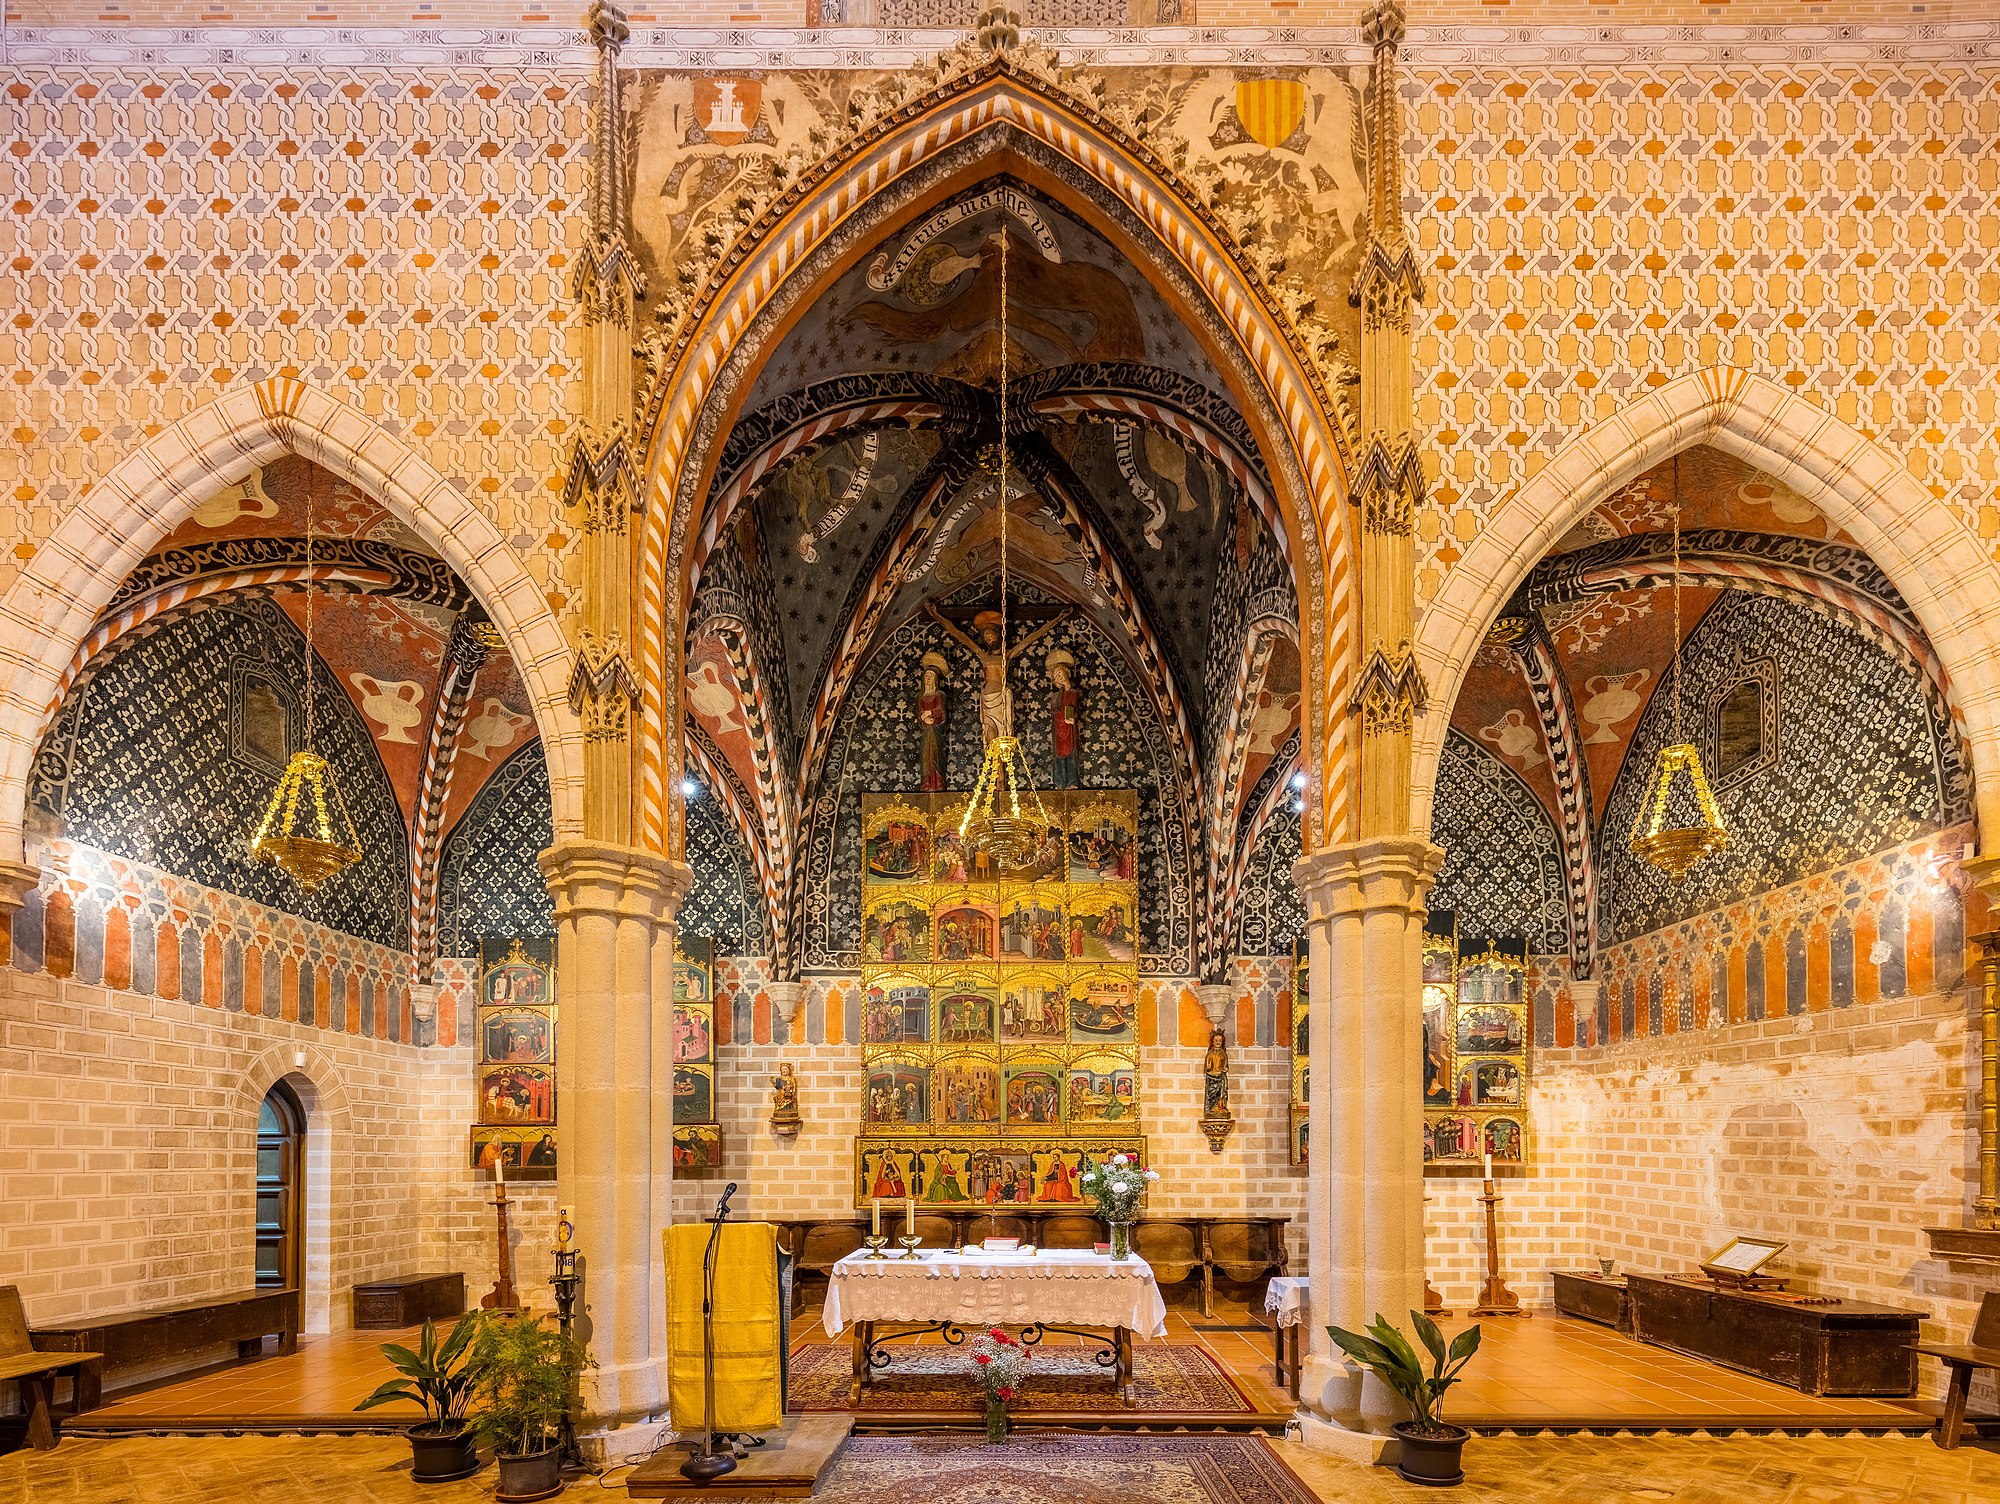 Altar of the church of St Felix, Torralba de Ribota, province of Zaragoza, Spain. The church, of mudéjar and late gothic style was built between 1367 and 1420. The church is a national heritage monument in Spain (known as Bien de Interés Cultural) since 2006.